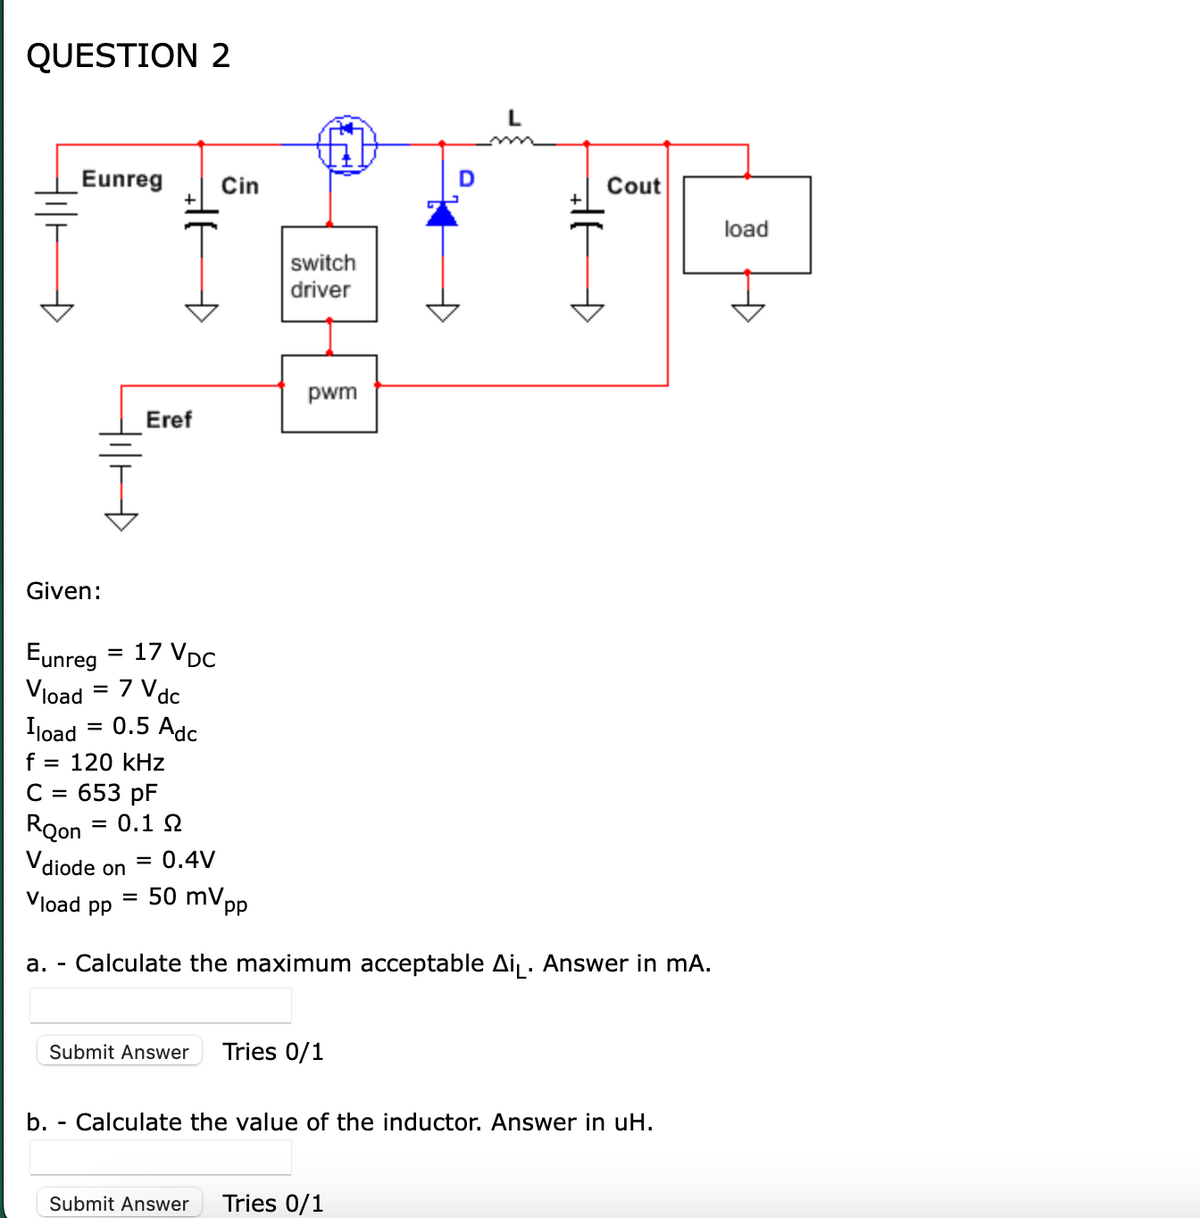 QUESTION 2
Eunreg Cin
Given:
||||
b.
Eunreg
Vload = 7 Vdc
Iload 0.5 Adc
f = 120 kHz
C = 653 pF
Roon = 0.1 Ω
Vdiode on
=
Vload pp
Đ
Eref
17 VDC
= 0.4V
= 50 mV.
pp
switch
driver
pwm
Submit Answer Tries 0/1
L
HE
Submit Answer Tries 0/1
+
a. Calculate the maximum acceptable Ai₁. Answer in mA.
Đ
Cout
Calculate the value of the inductor. Answer in uH.
load
H